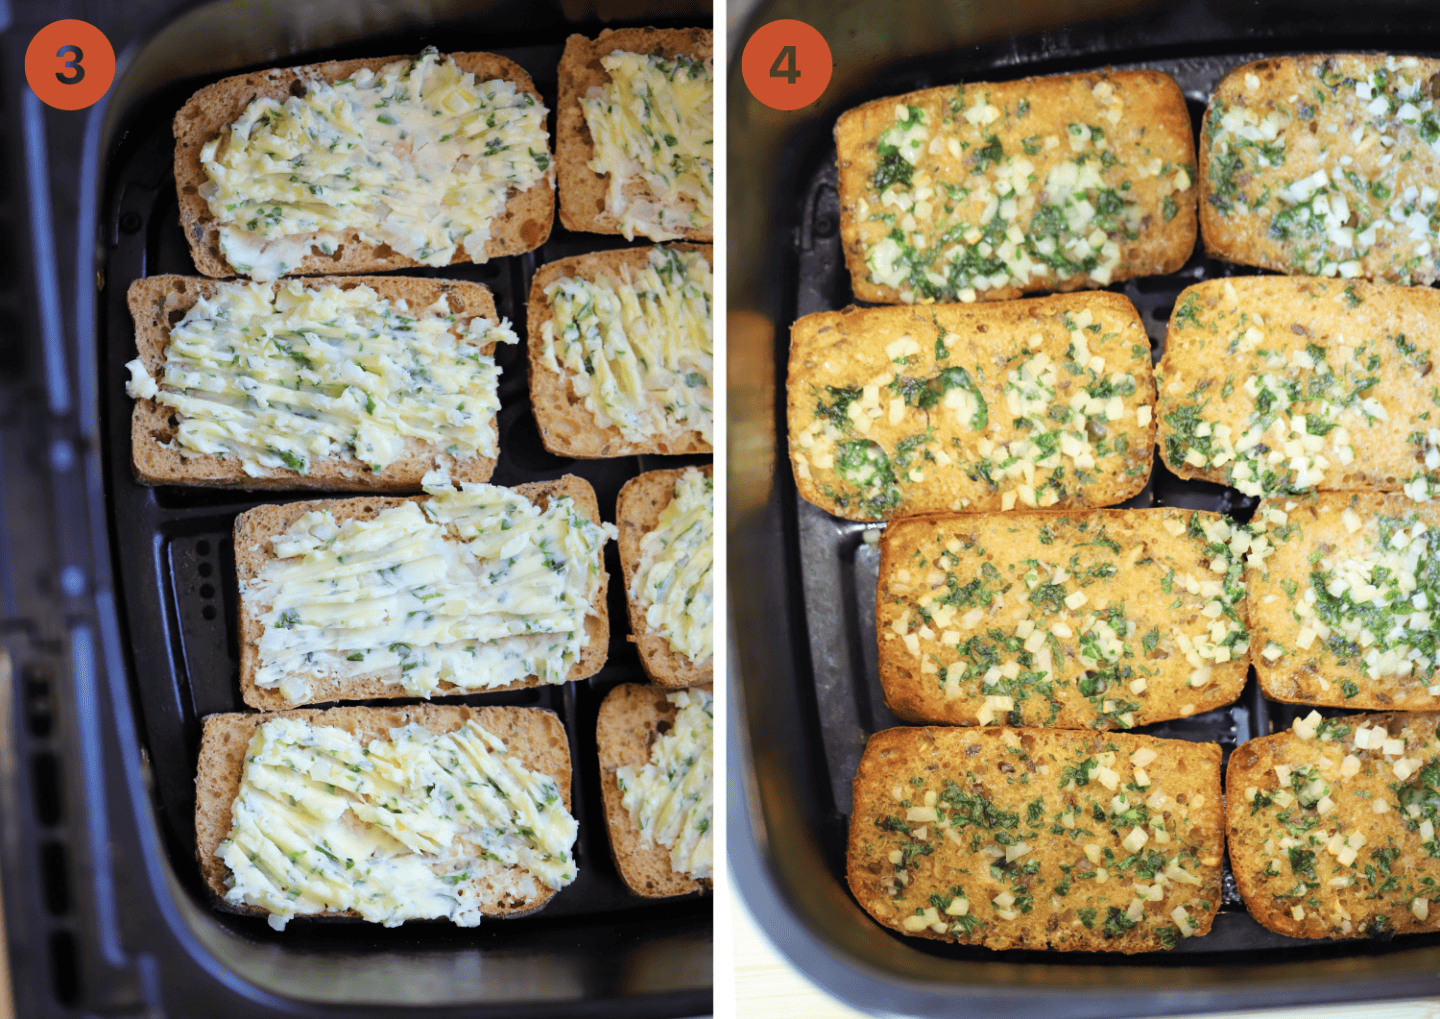 Gluten free garlic bread in the air fryer before and after cooking.